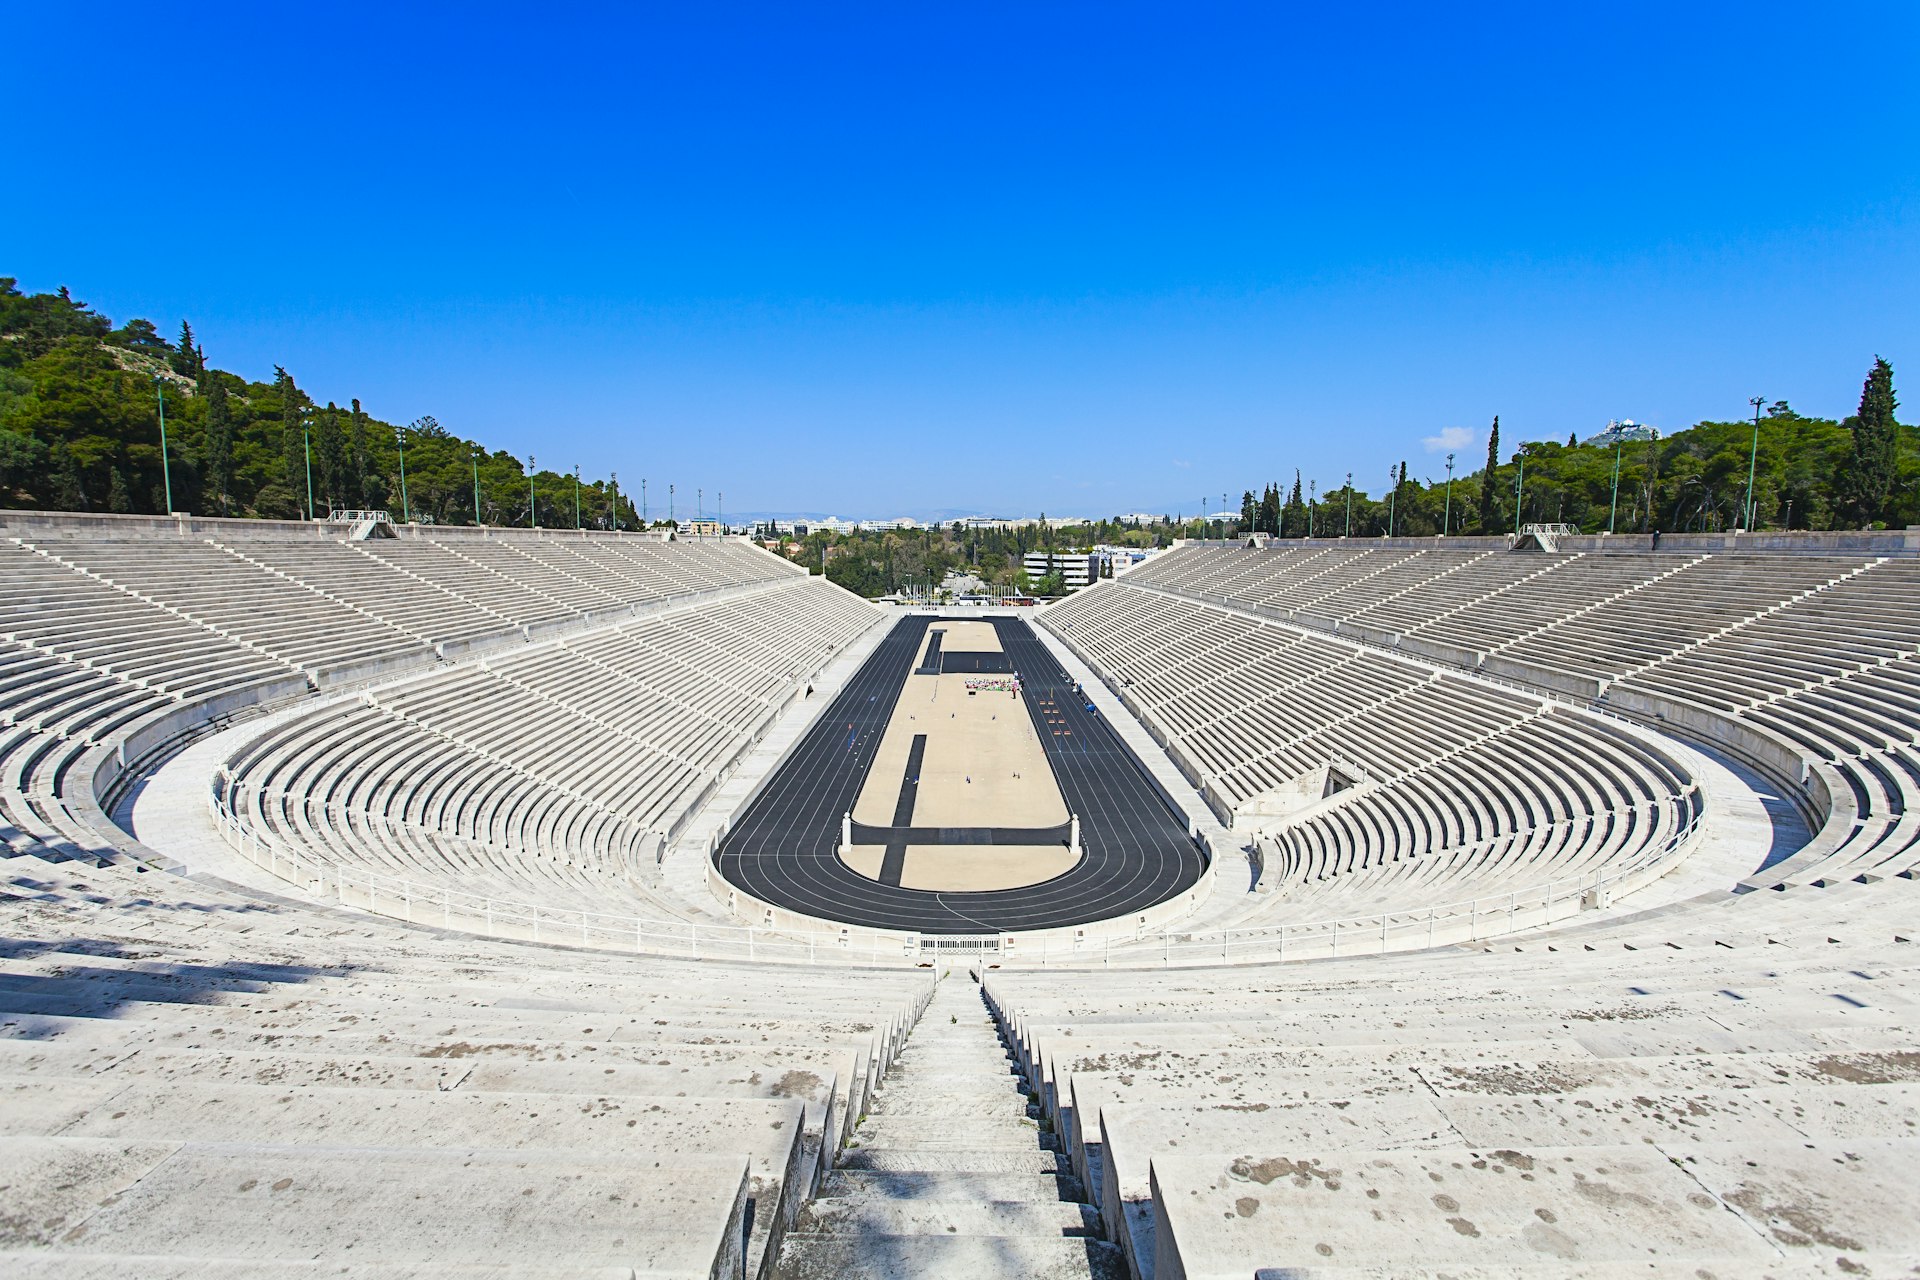 An empty Panathenaic Stadium as seen from the top of the seats in Athens, Greece on a sunny day